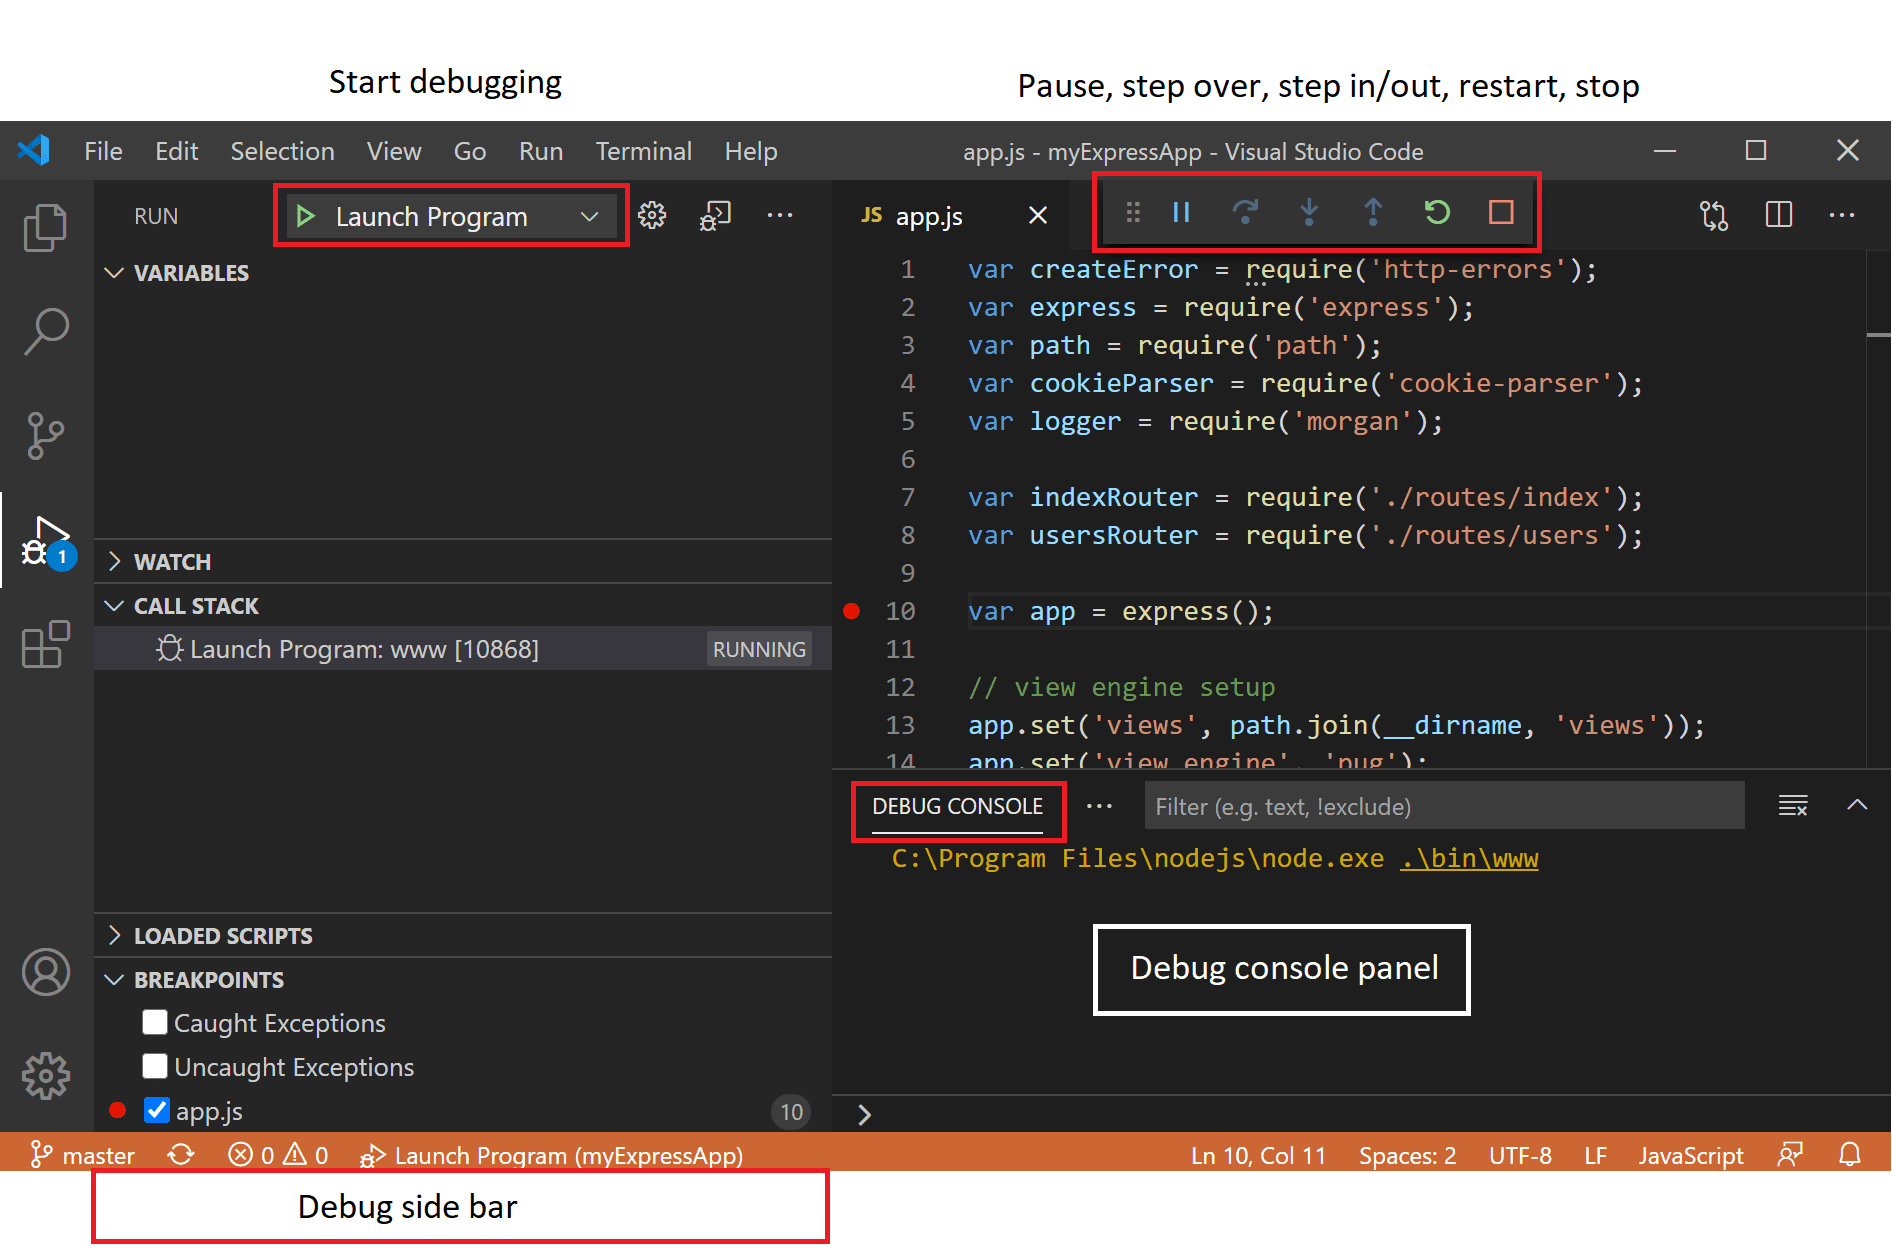 A screenshot of the debugger integrated in VS Code